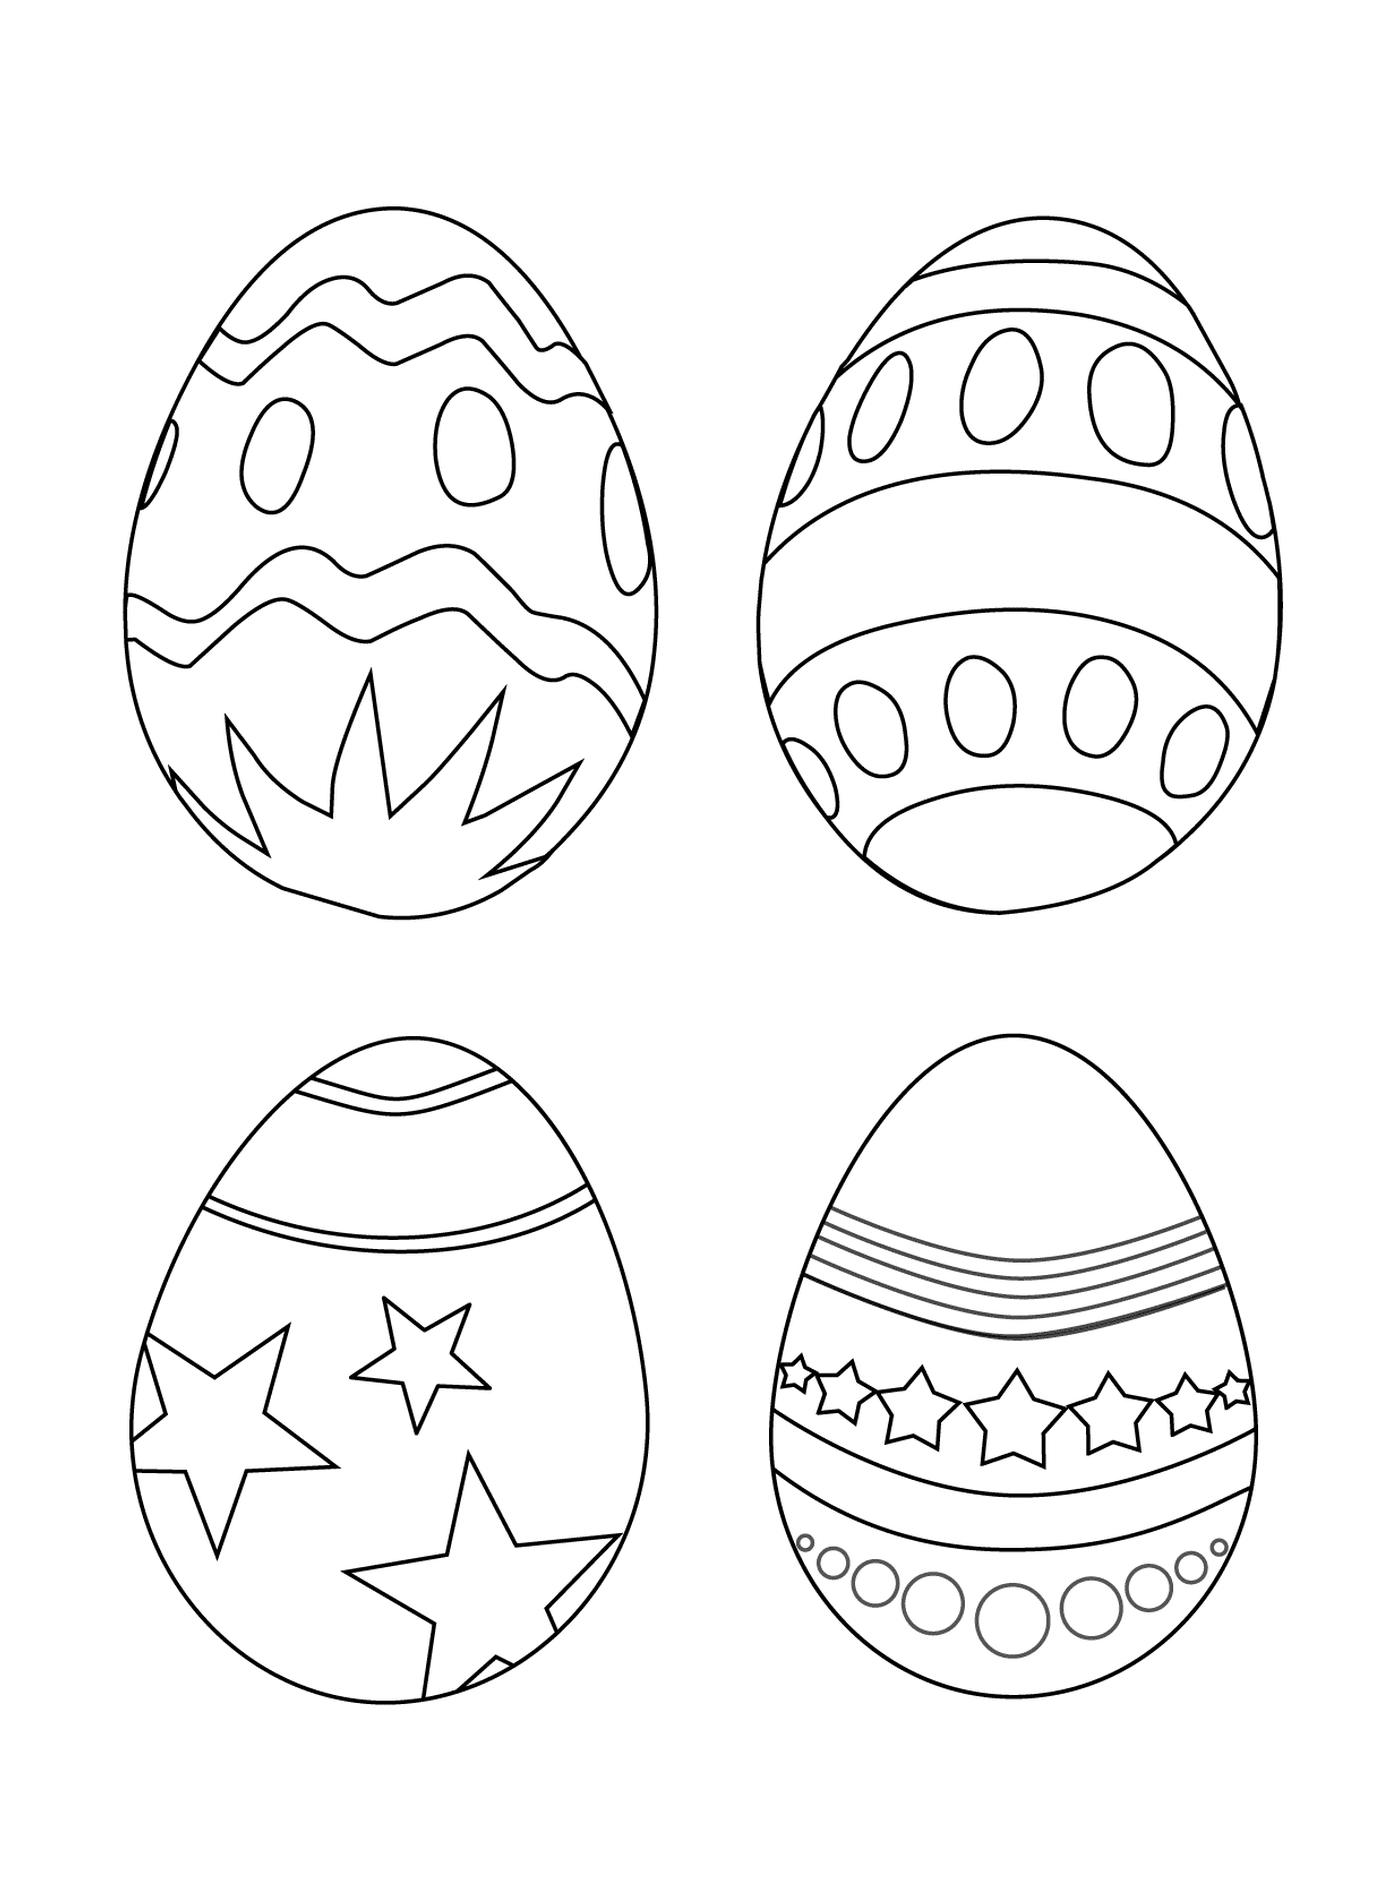  Set of four single eggs in black and white 